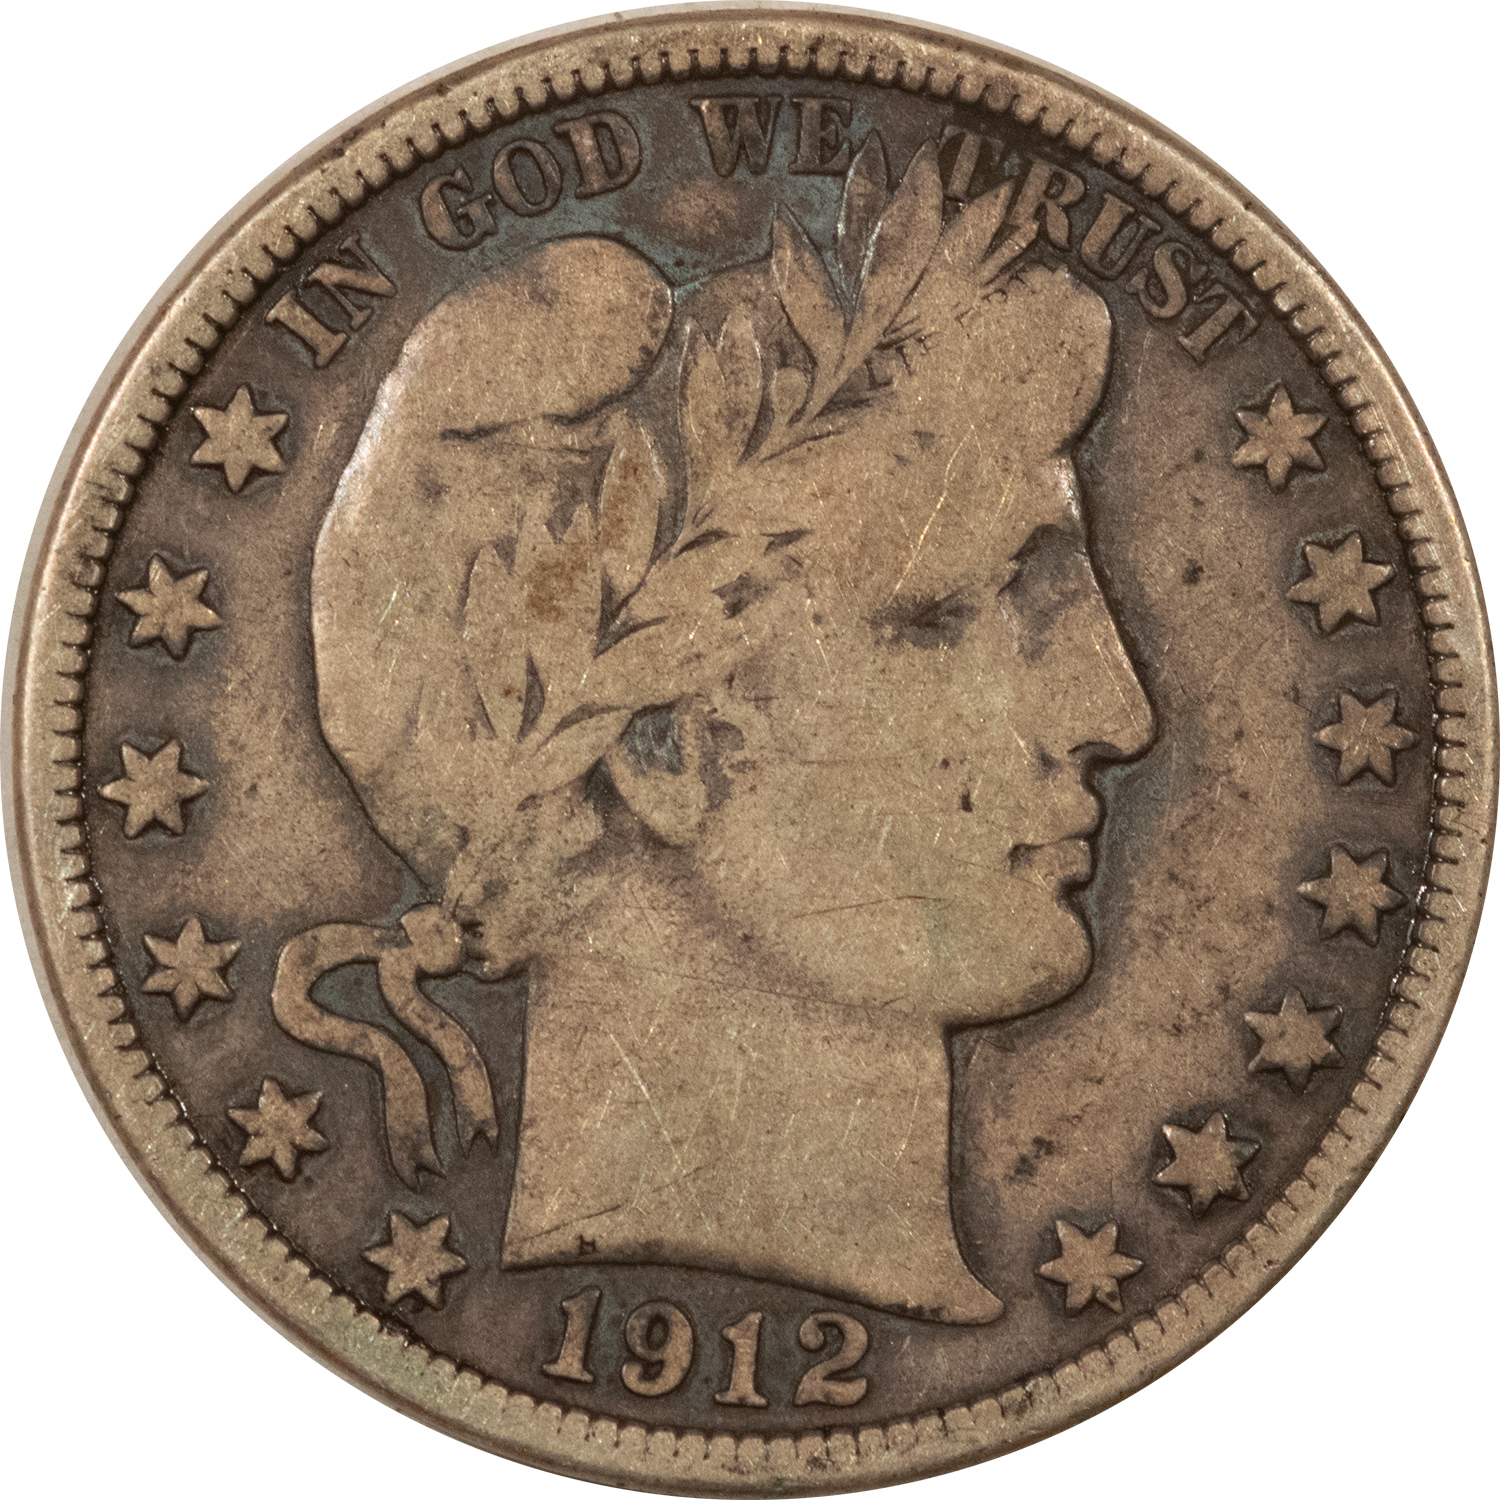 1912 BARBER HALF DOLLAR - CIRCULATED, ALL LETTERS OF LIBERTY VISIBLE!